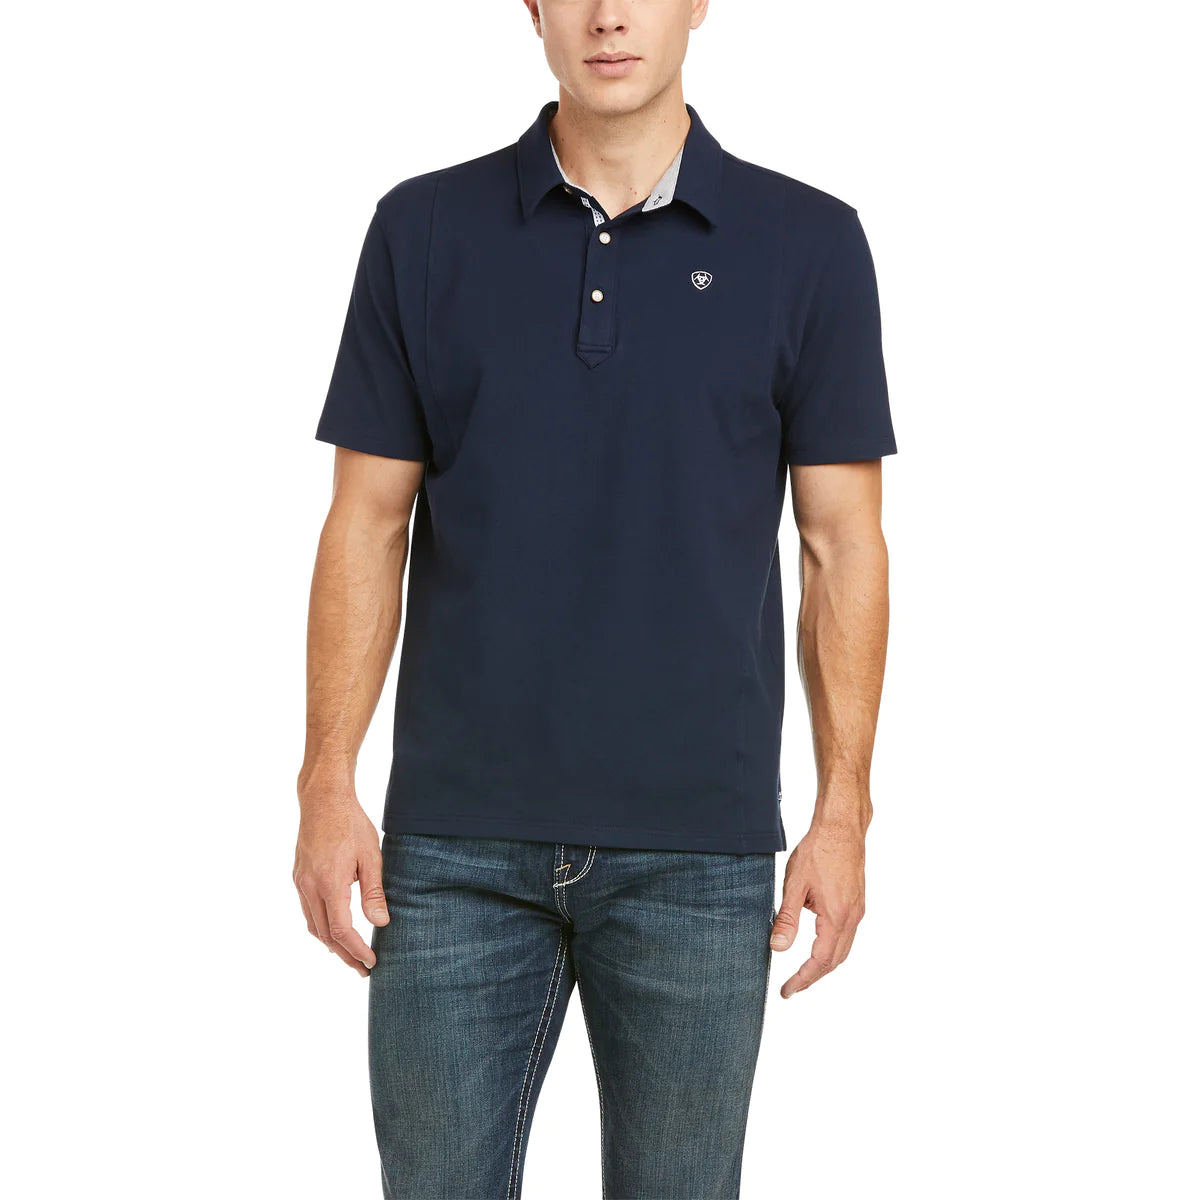 Ariat Mns Medal Polo Navy